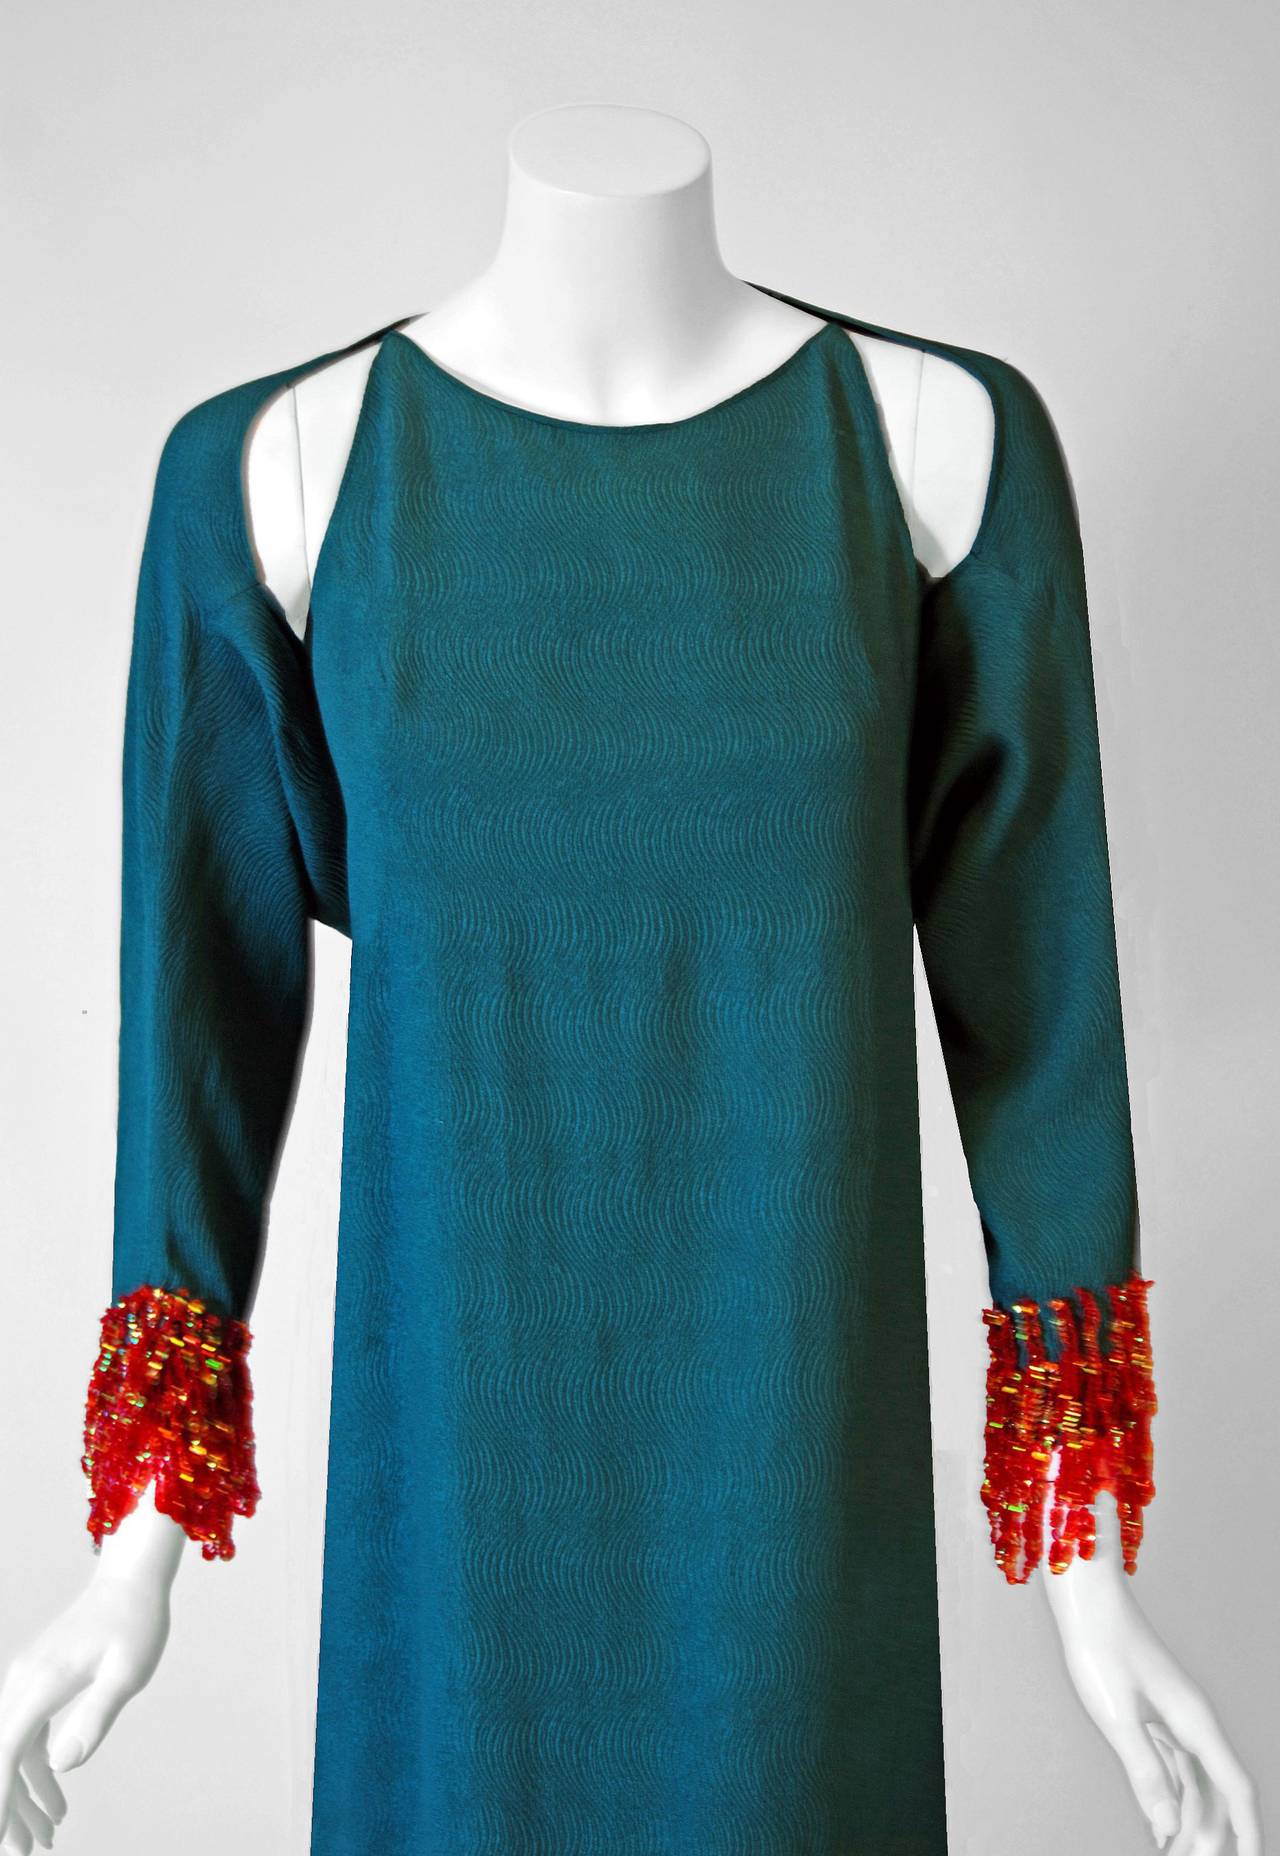 Spectacular 1966 Pierre Cardin haute-couture designer cocktail ensemble in the prettiest teal wave-textured silk. In 1951 Cardin opened his own couture house and by 1957, he started a ready-to-wear line; a bold move for a French couturier at the